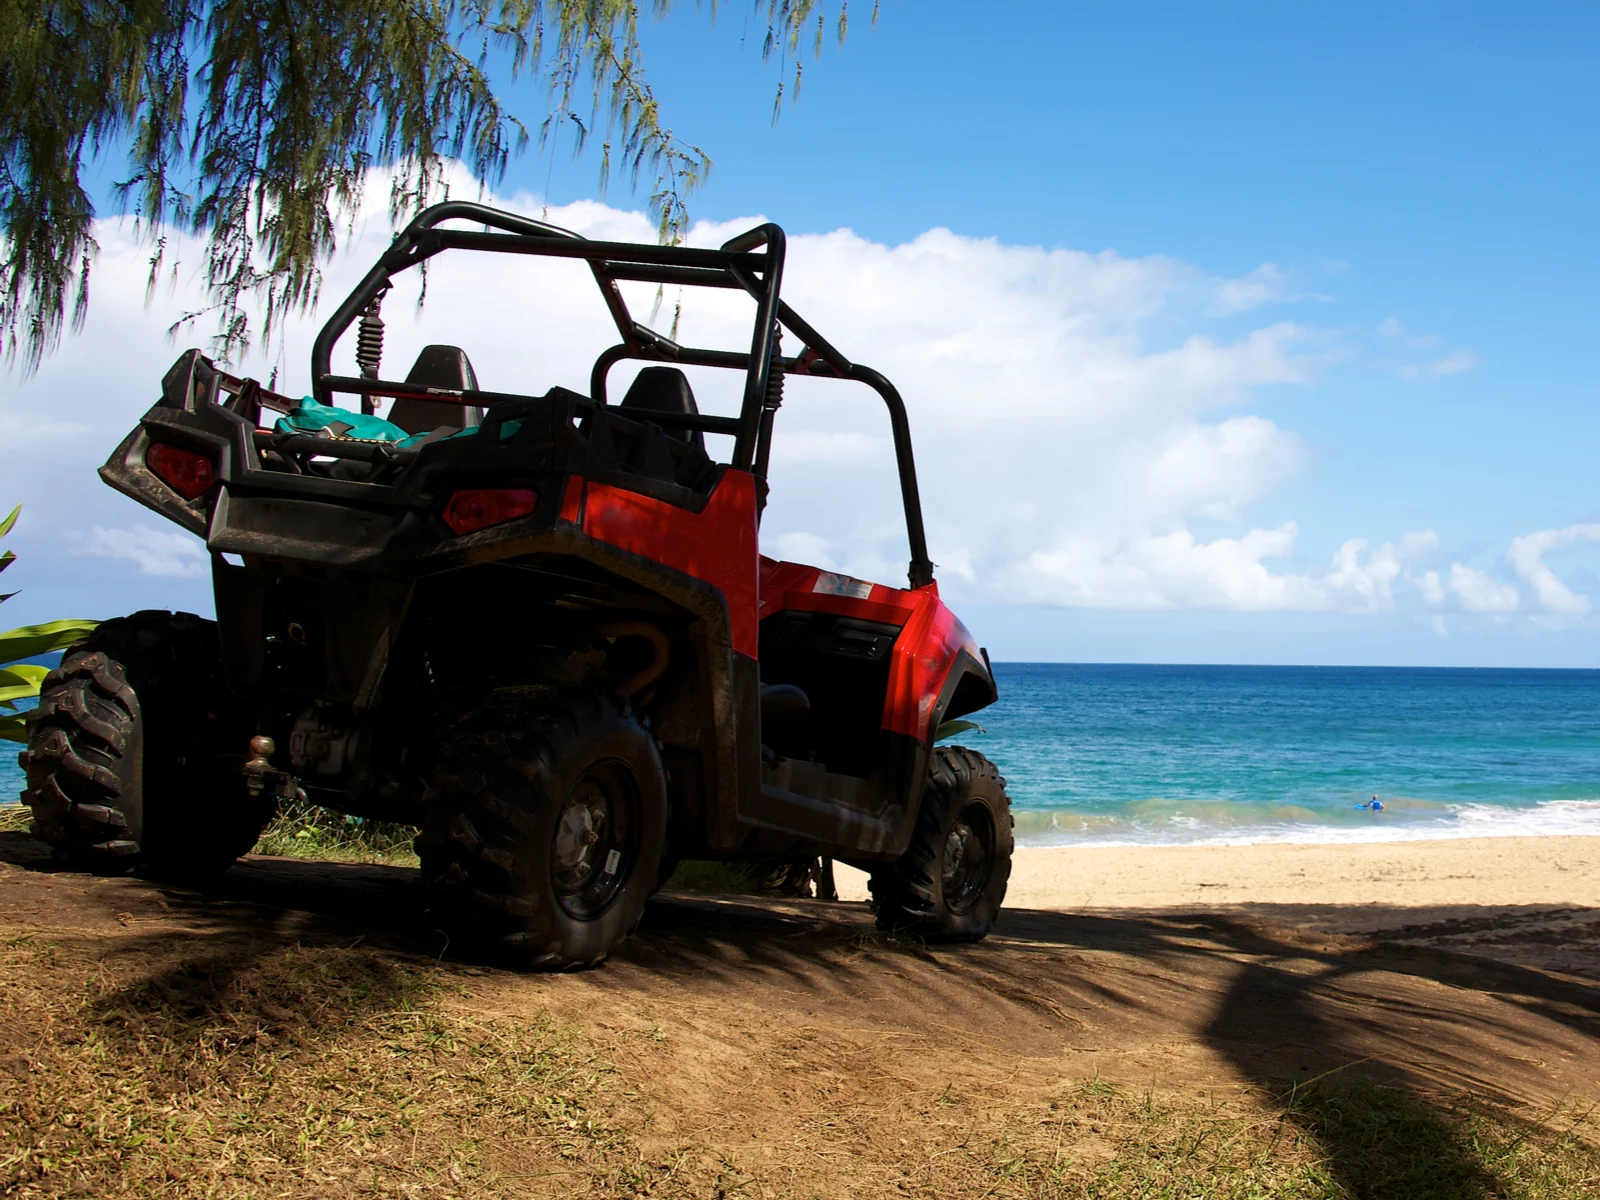 ATV tour on a beach, one of the best things to do in Maui